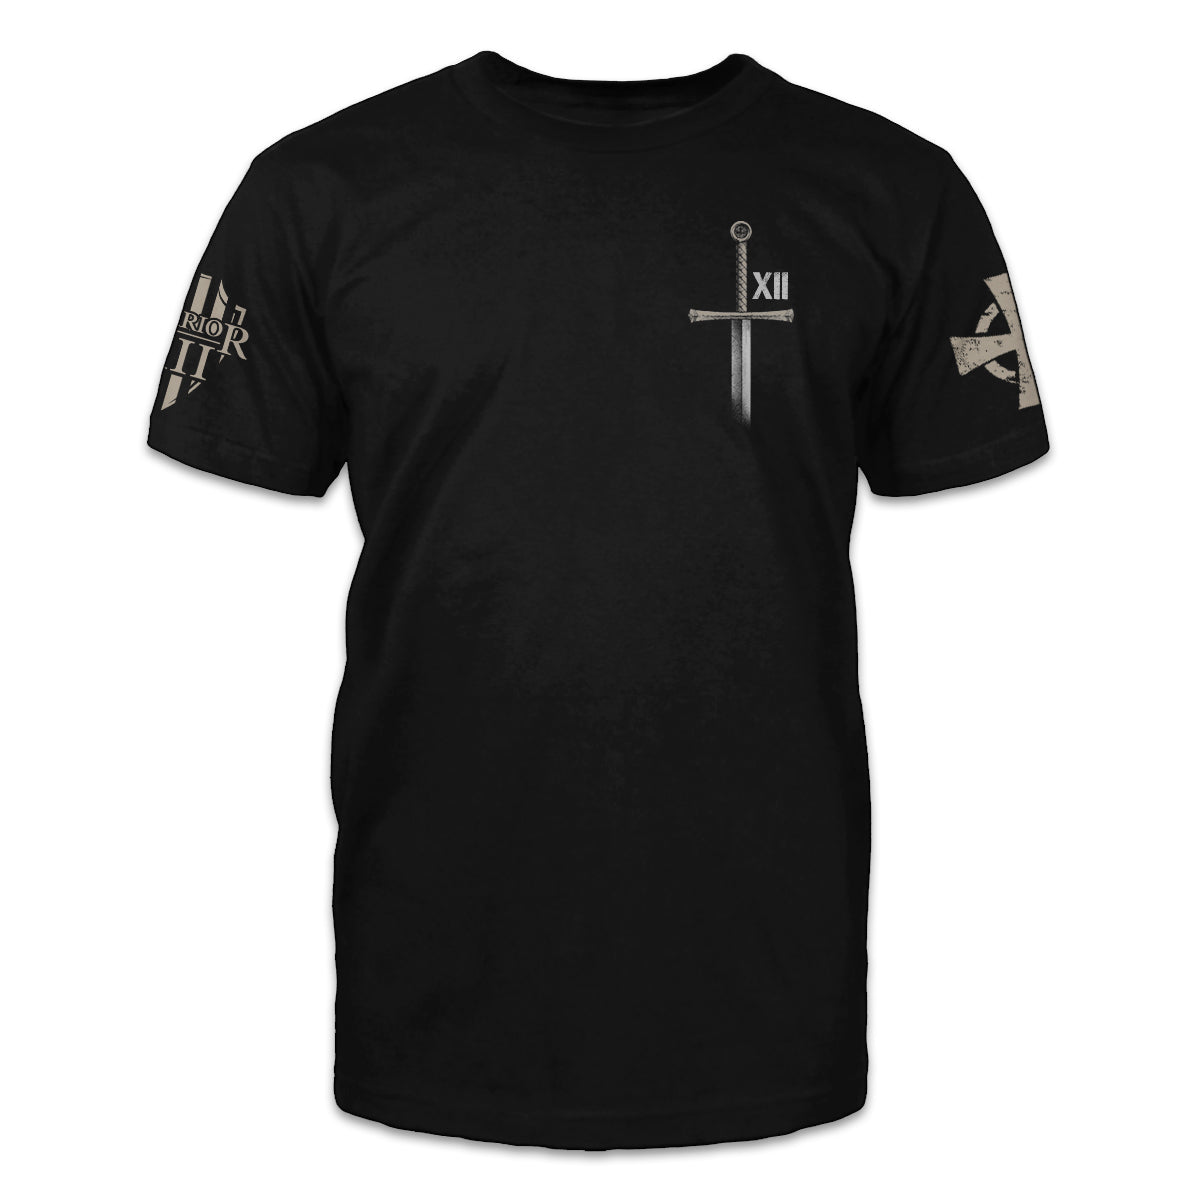 A black t-shirt with a sword and roman numerals XII printed on the front.